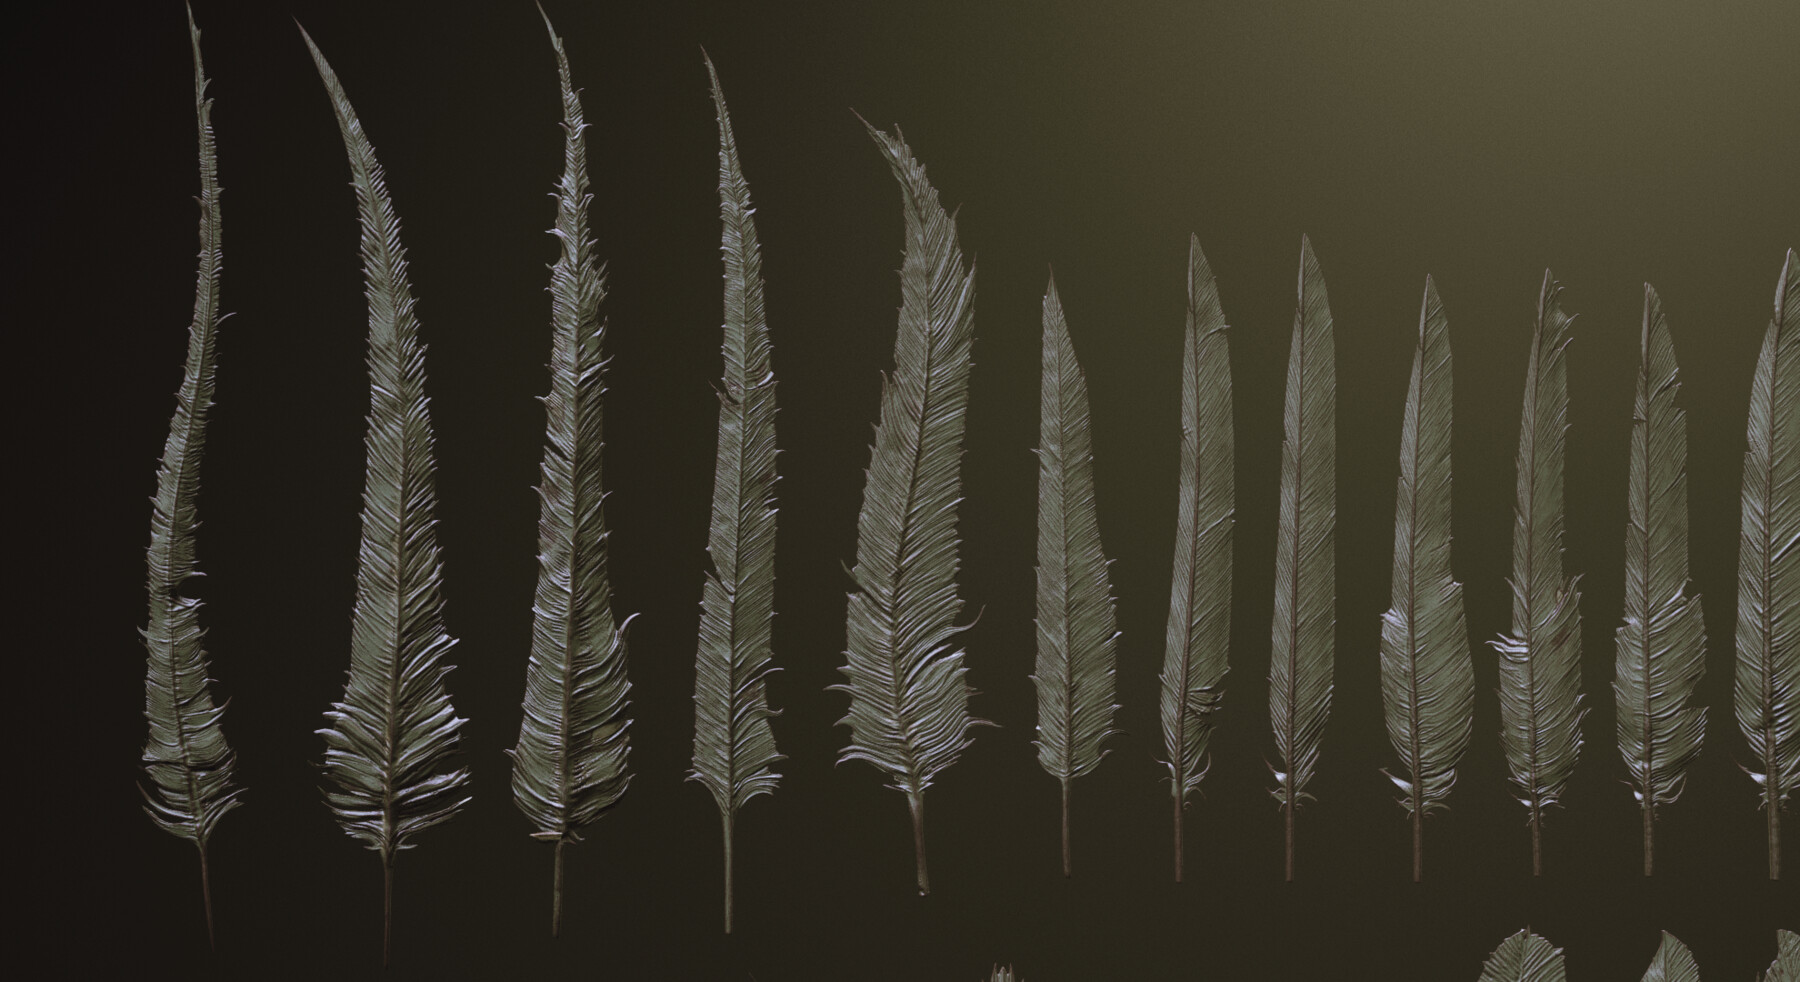 ArtStation - Red-Tailed Hawk Feathers Texture Pack + IMM